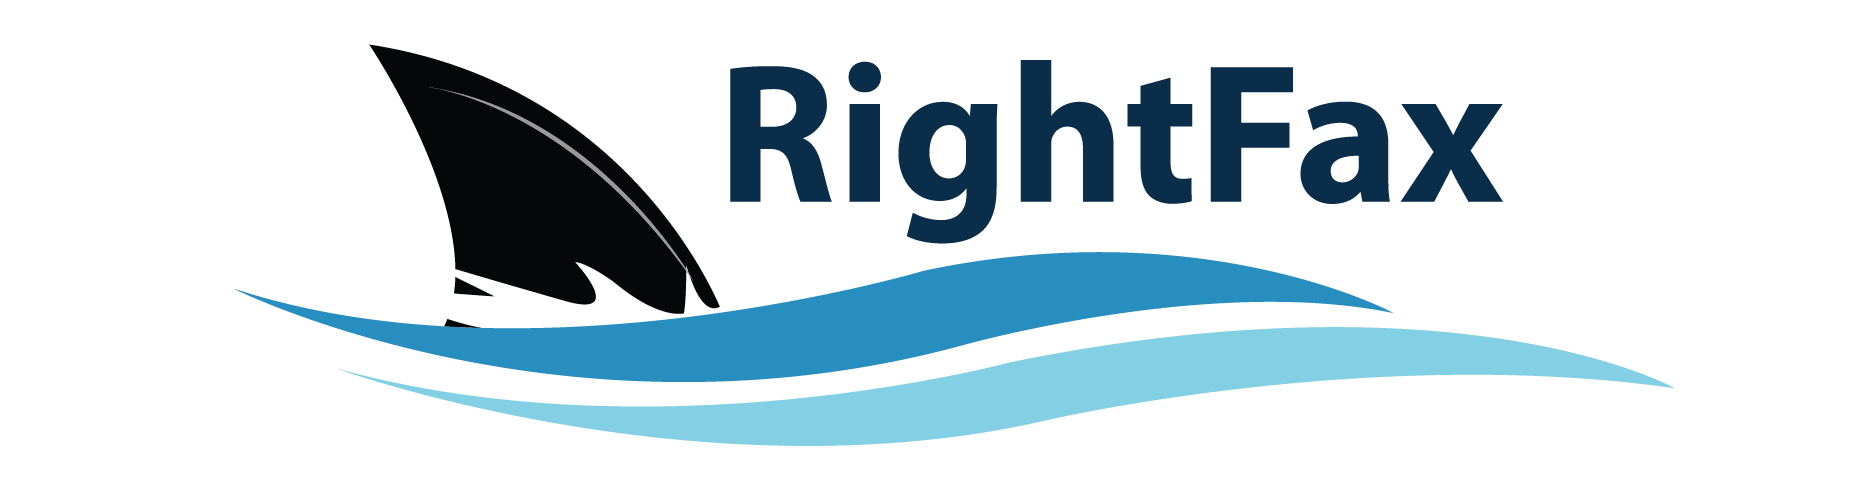 RightFax Logo - RightFax Selling Point: Ease of Use — The Fax Guys